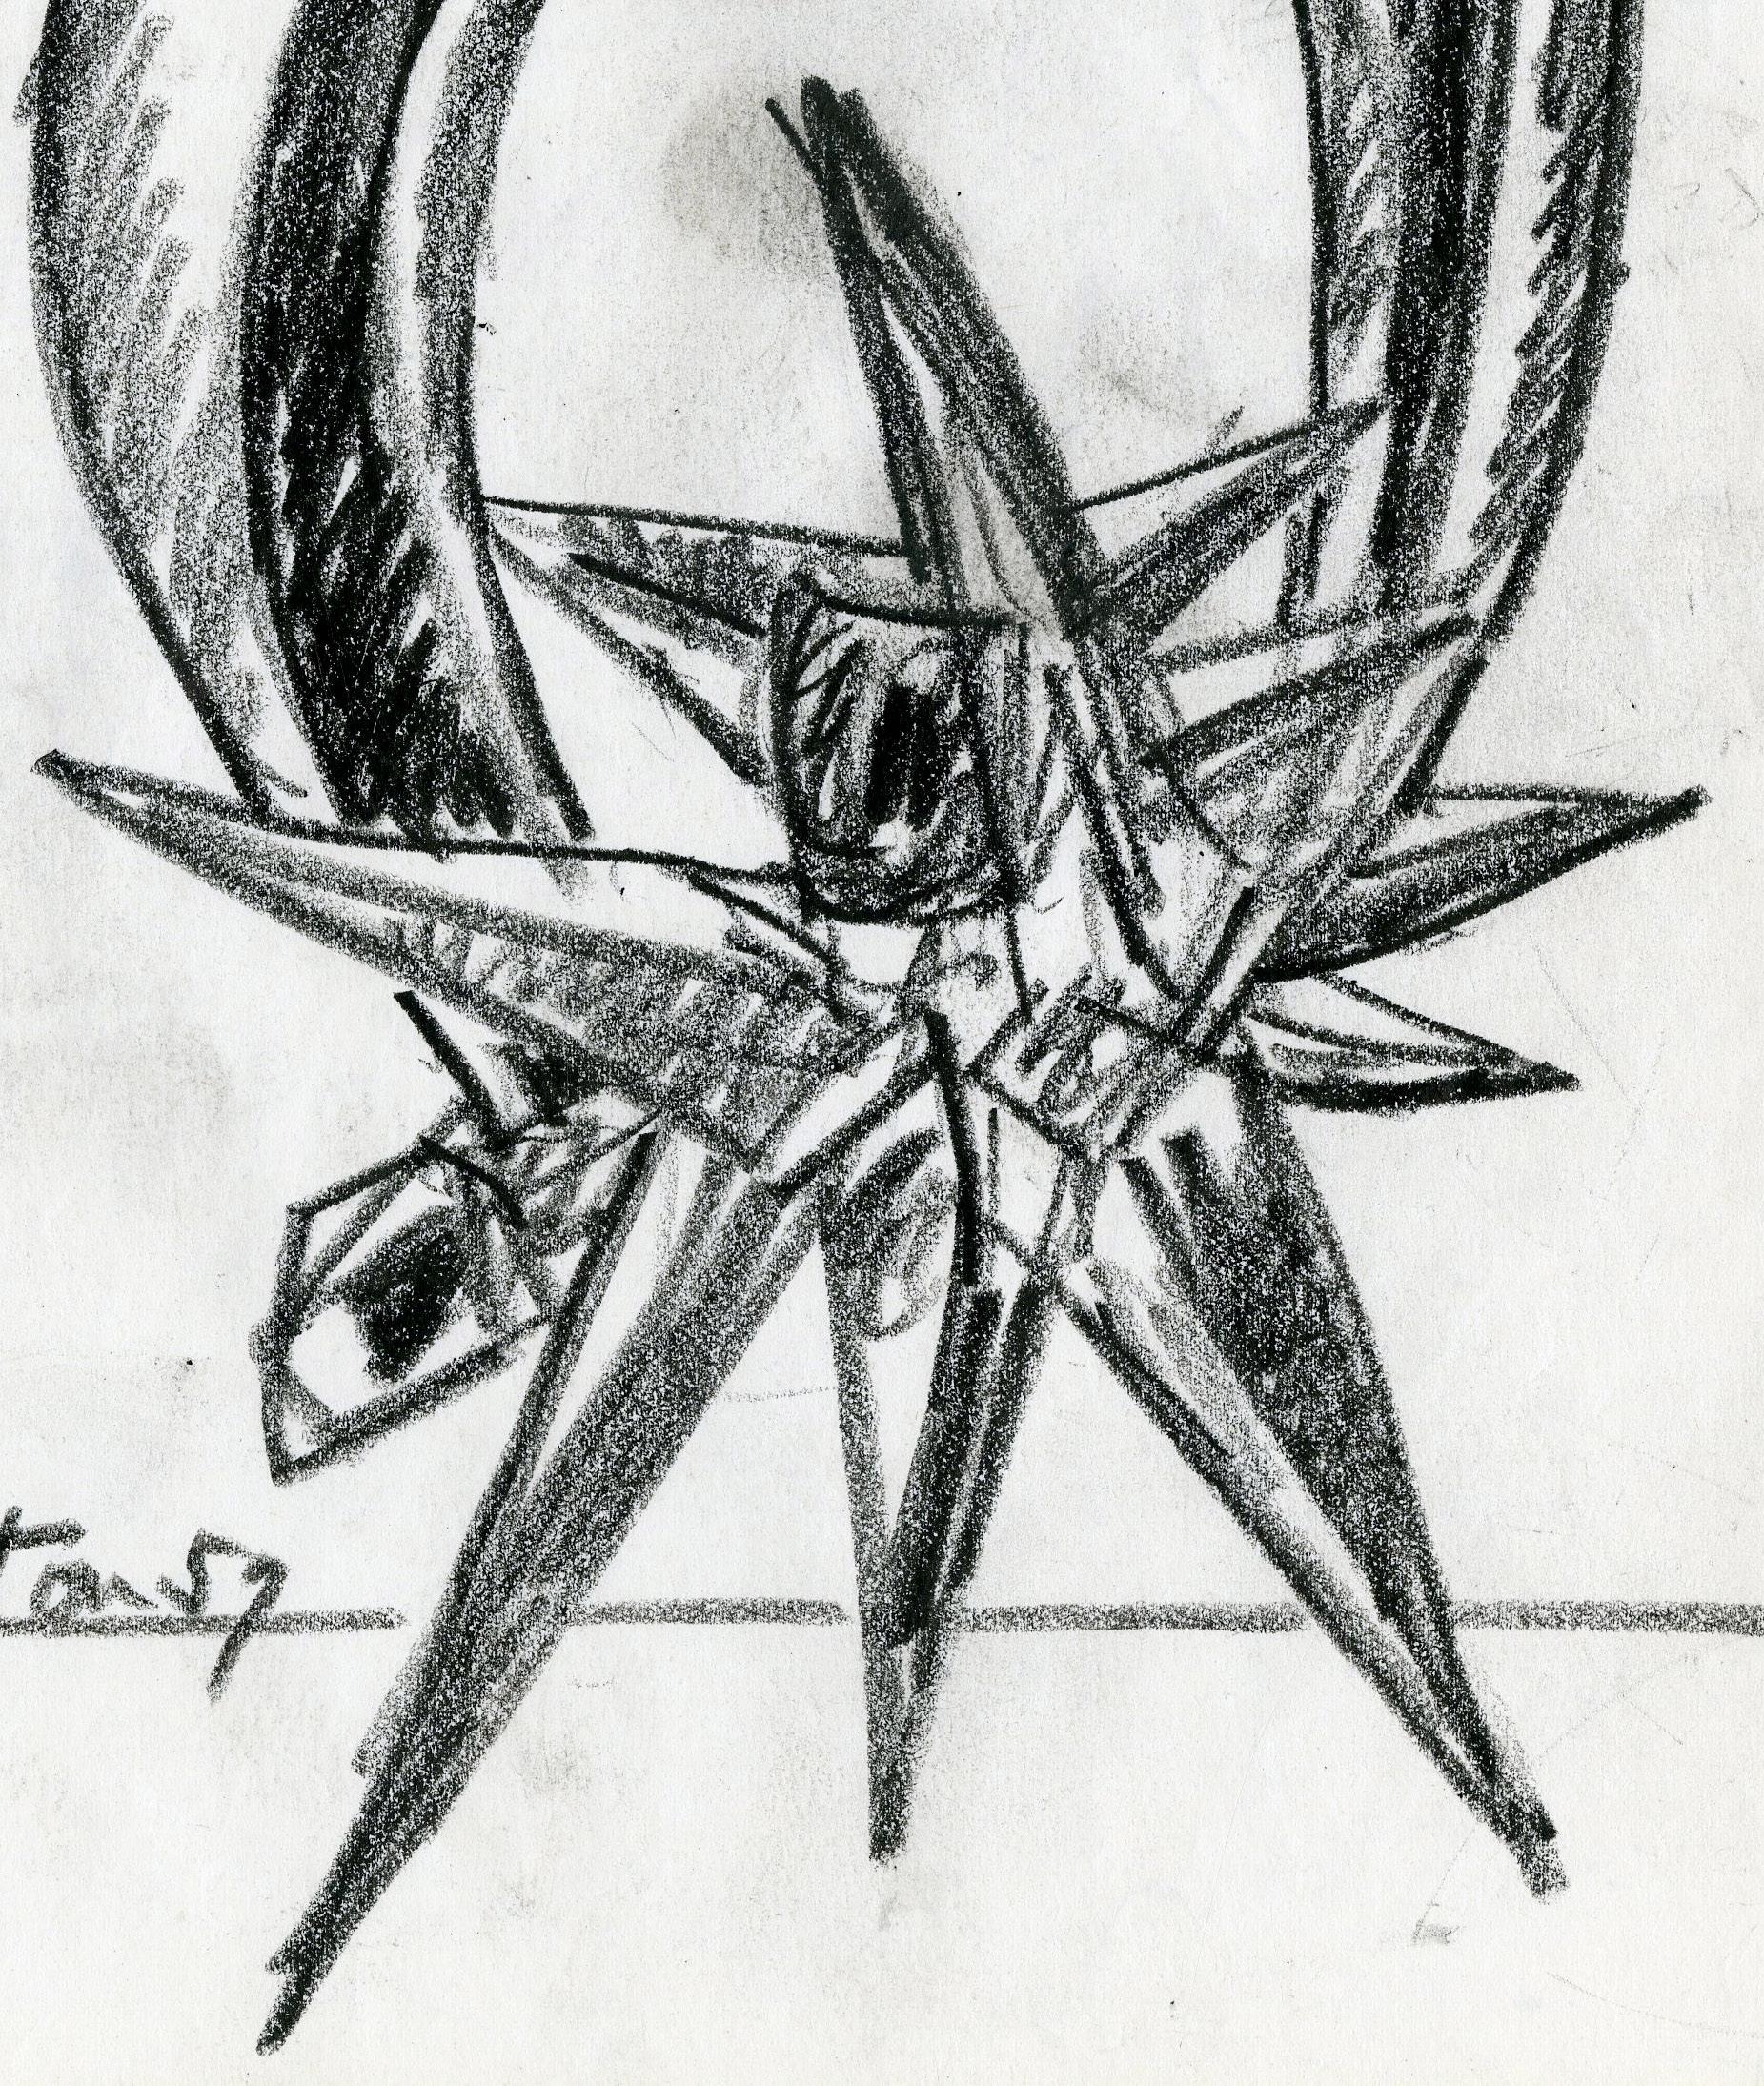 Preliminary drawing for the sculpture Diadem
Black Crayon on paper, 1957
Signed and dated lower left
The preliminary drawing for the 1957 sculpture of the same name in the collection of the Baltimore Museum of Art (43 inches tall).  The is a smaller